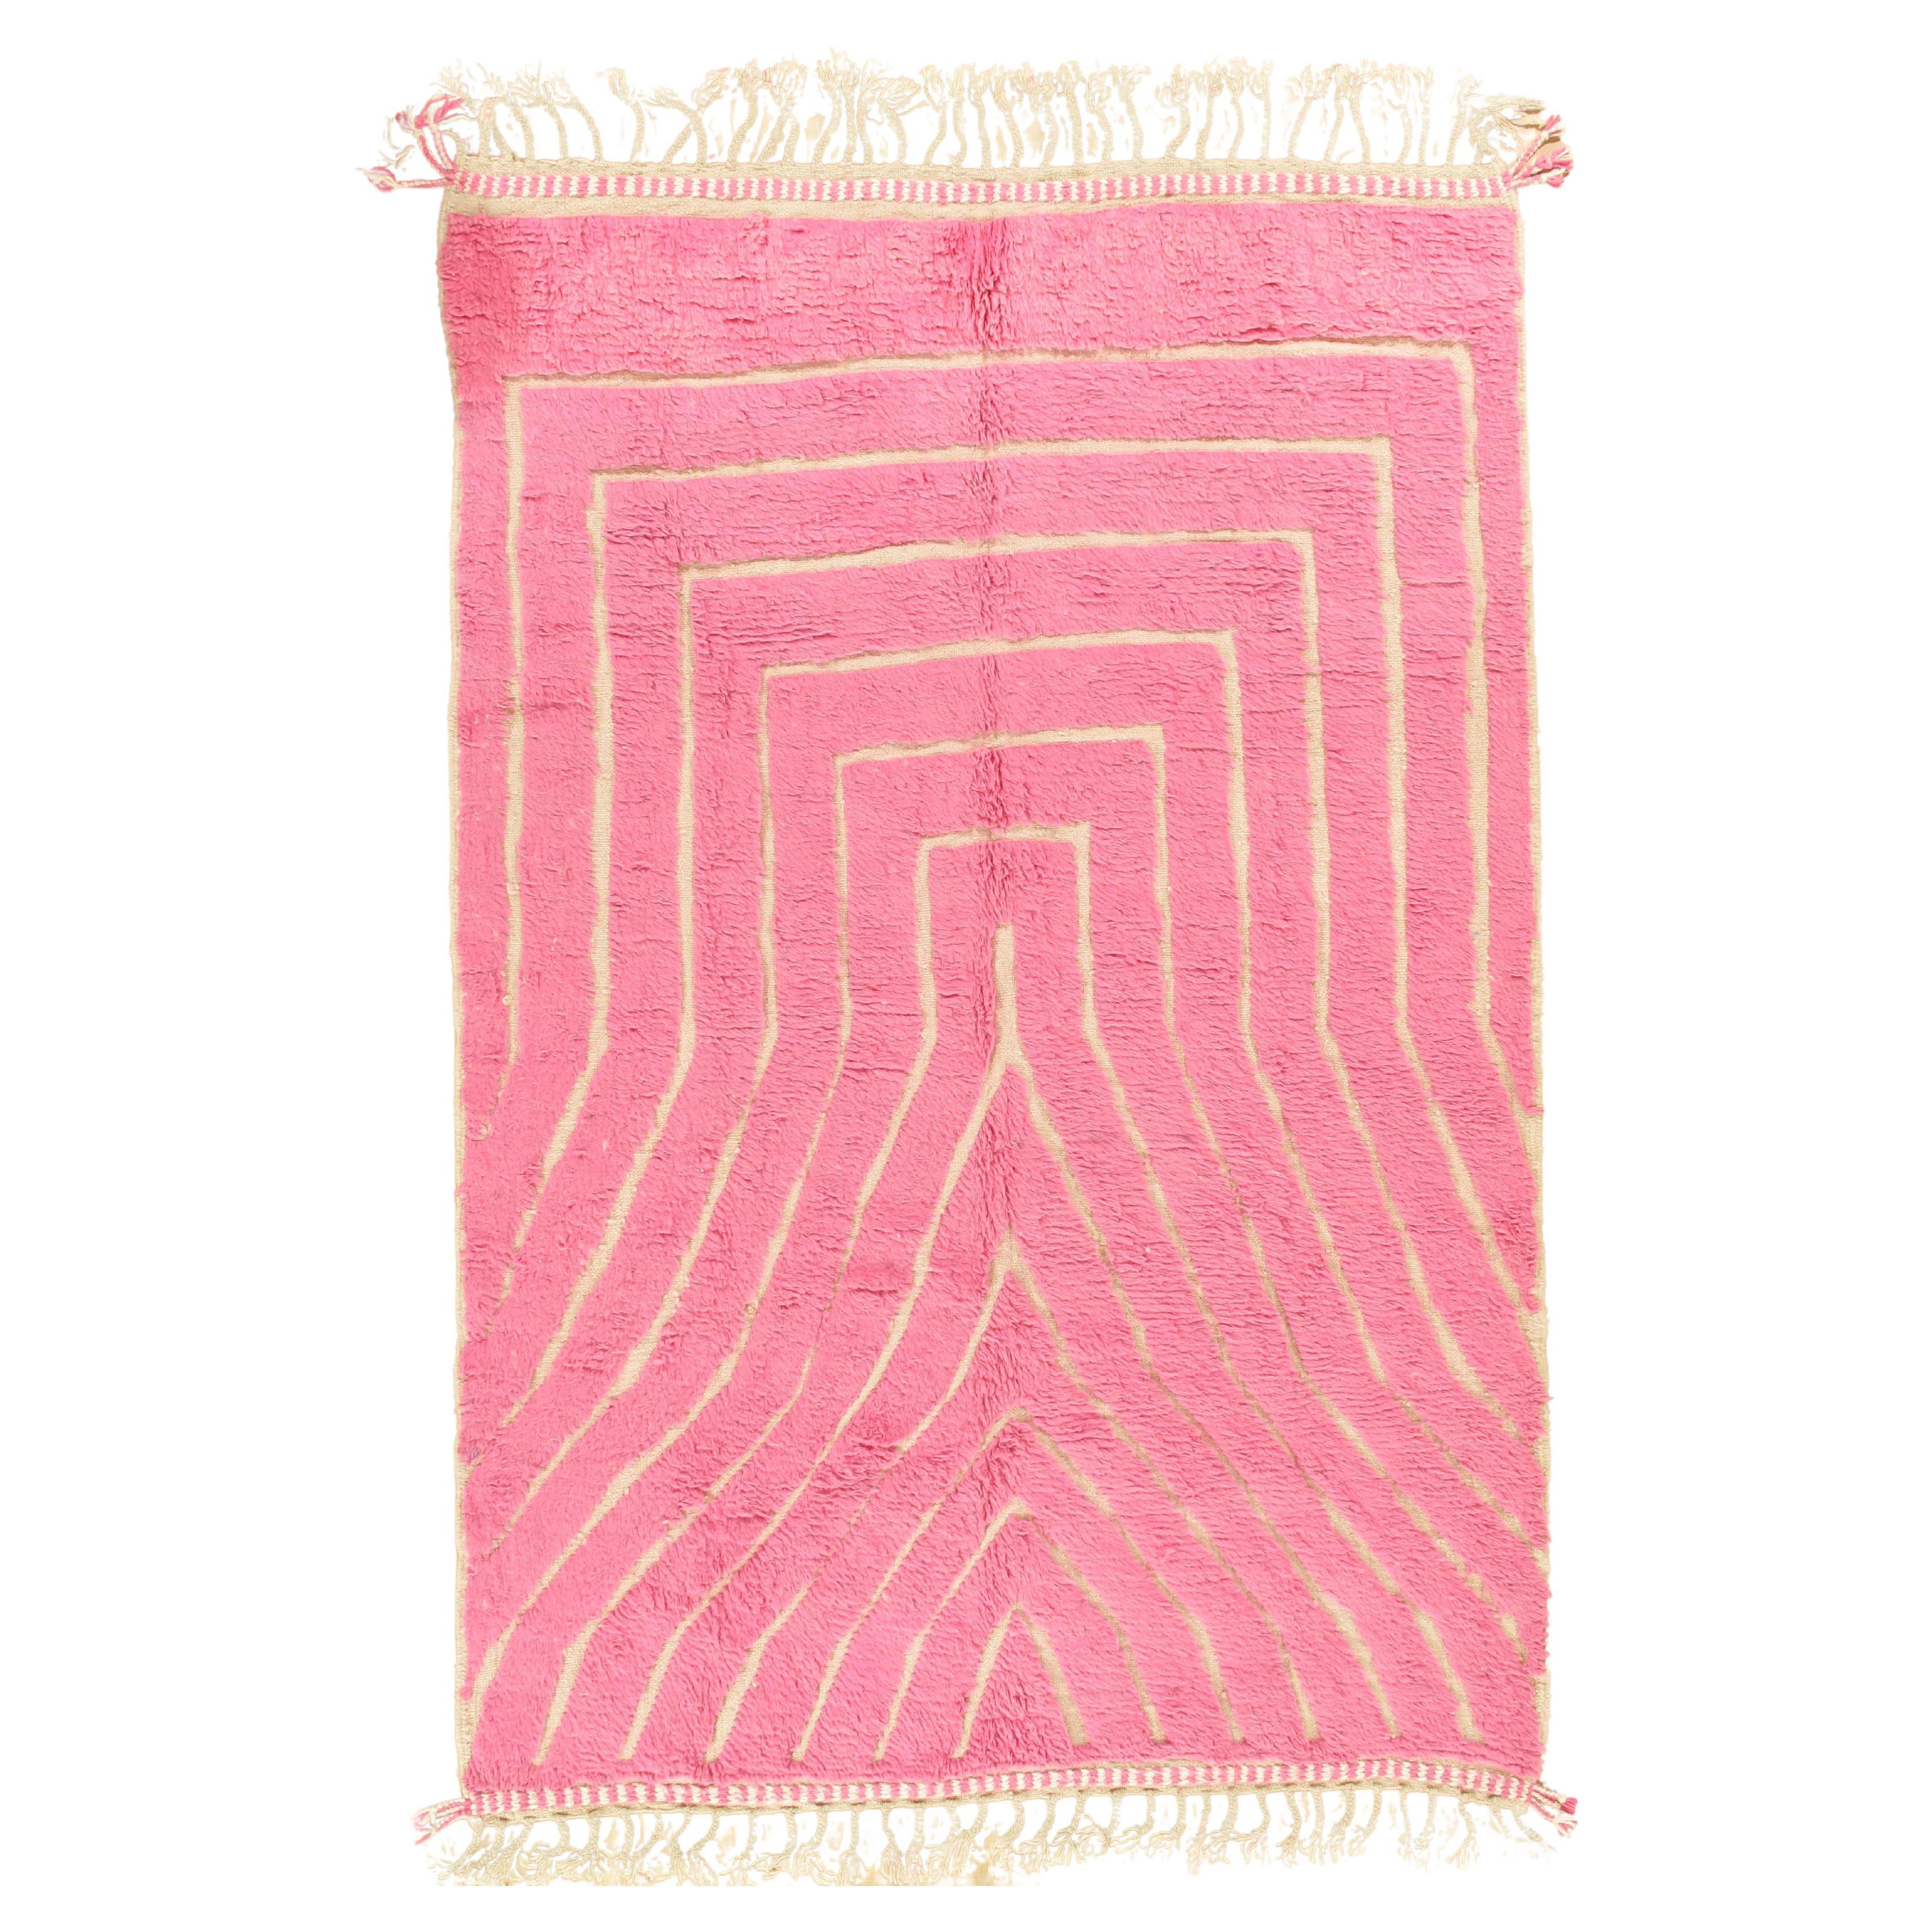 Vintage Moroccan Rug by Berber Tribes of Morocco, pink wool and cream color